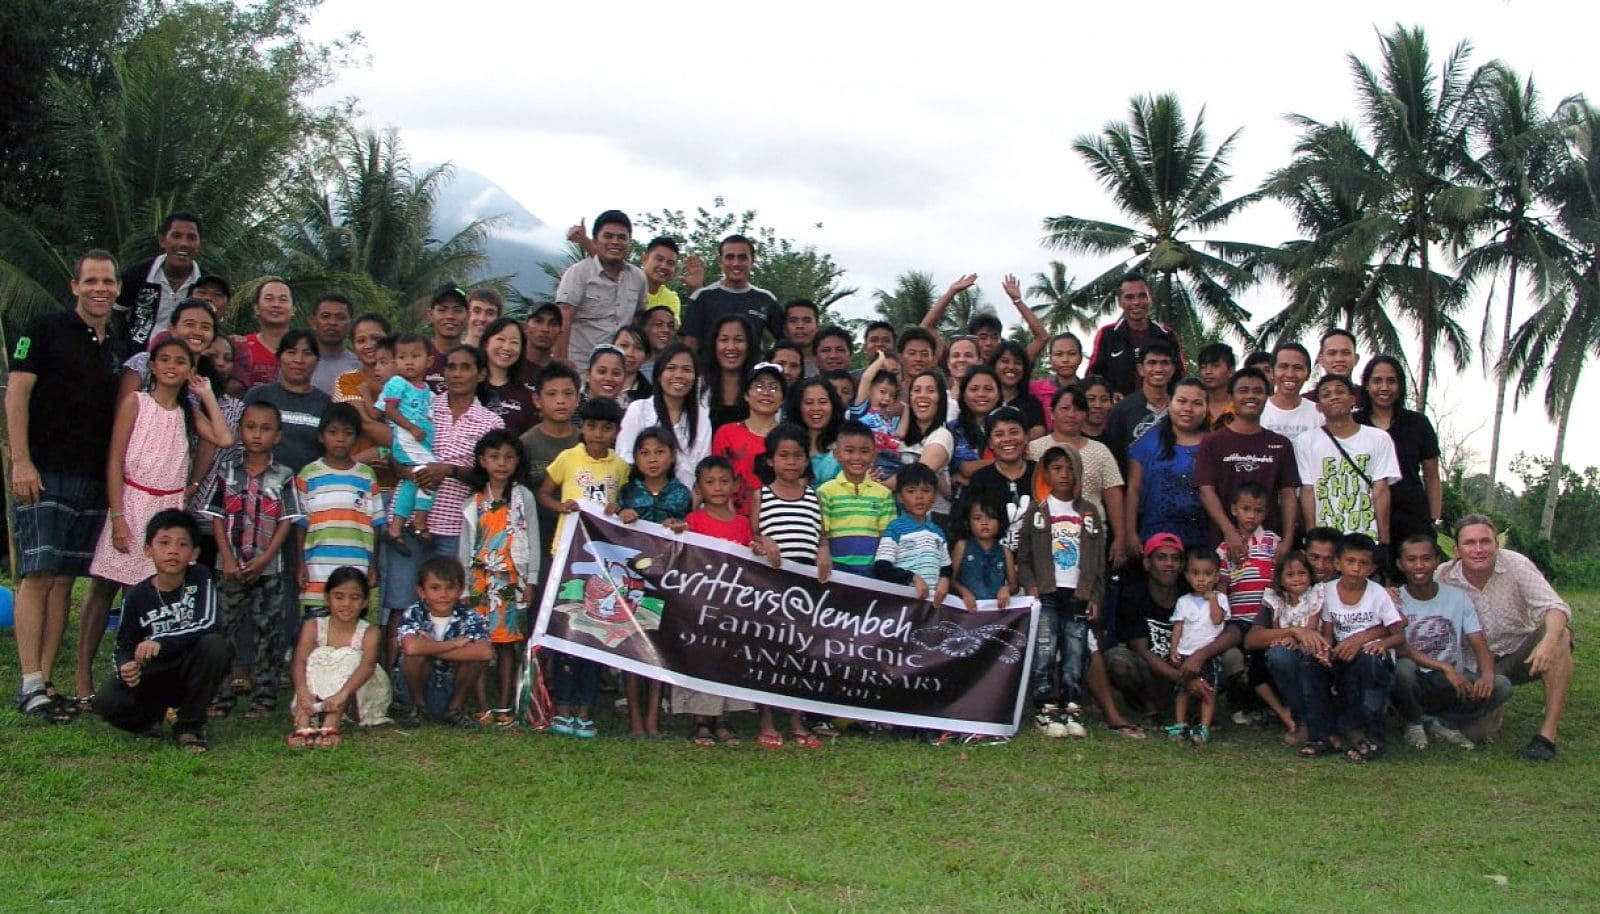 2013 Critters@Lembeh Family Picnic Day